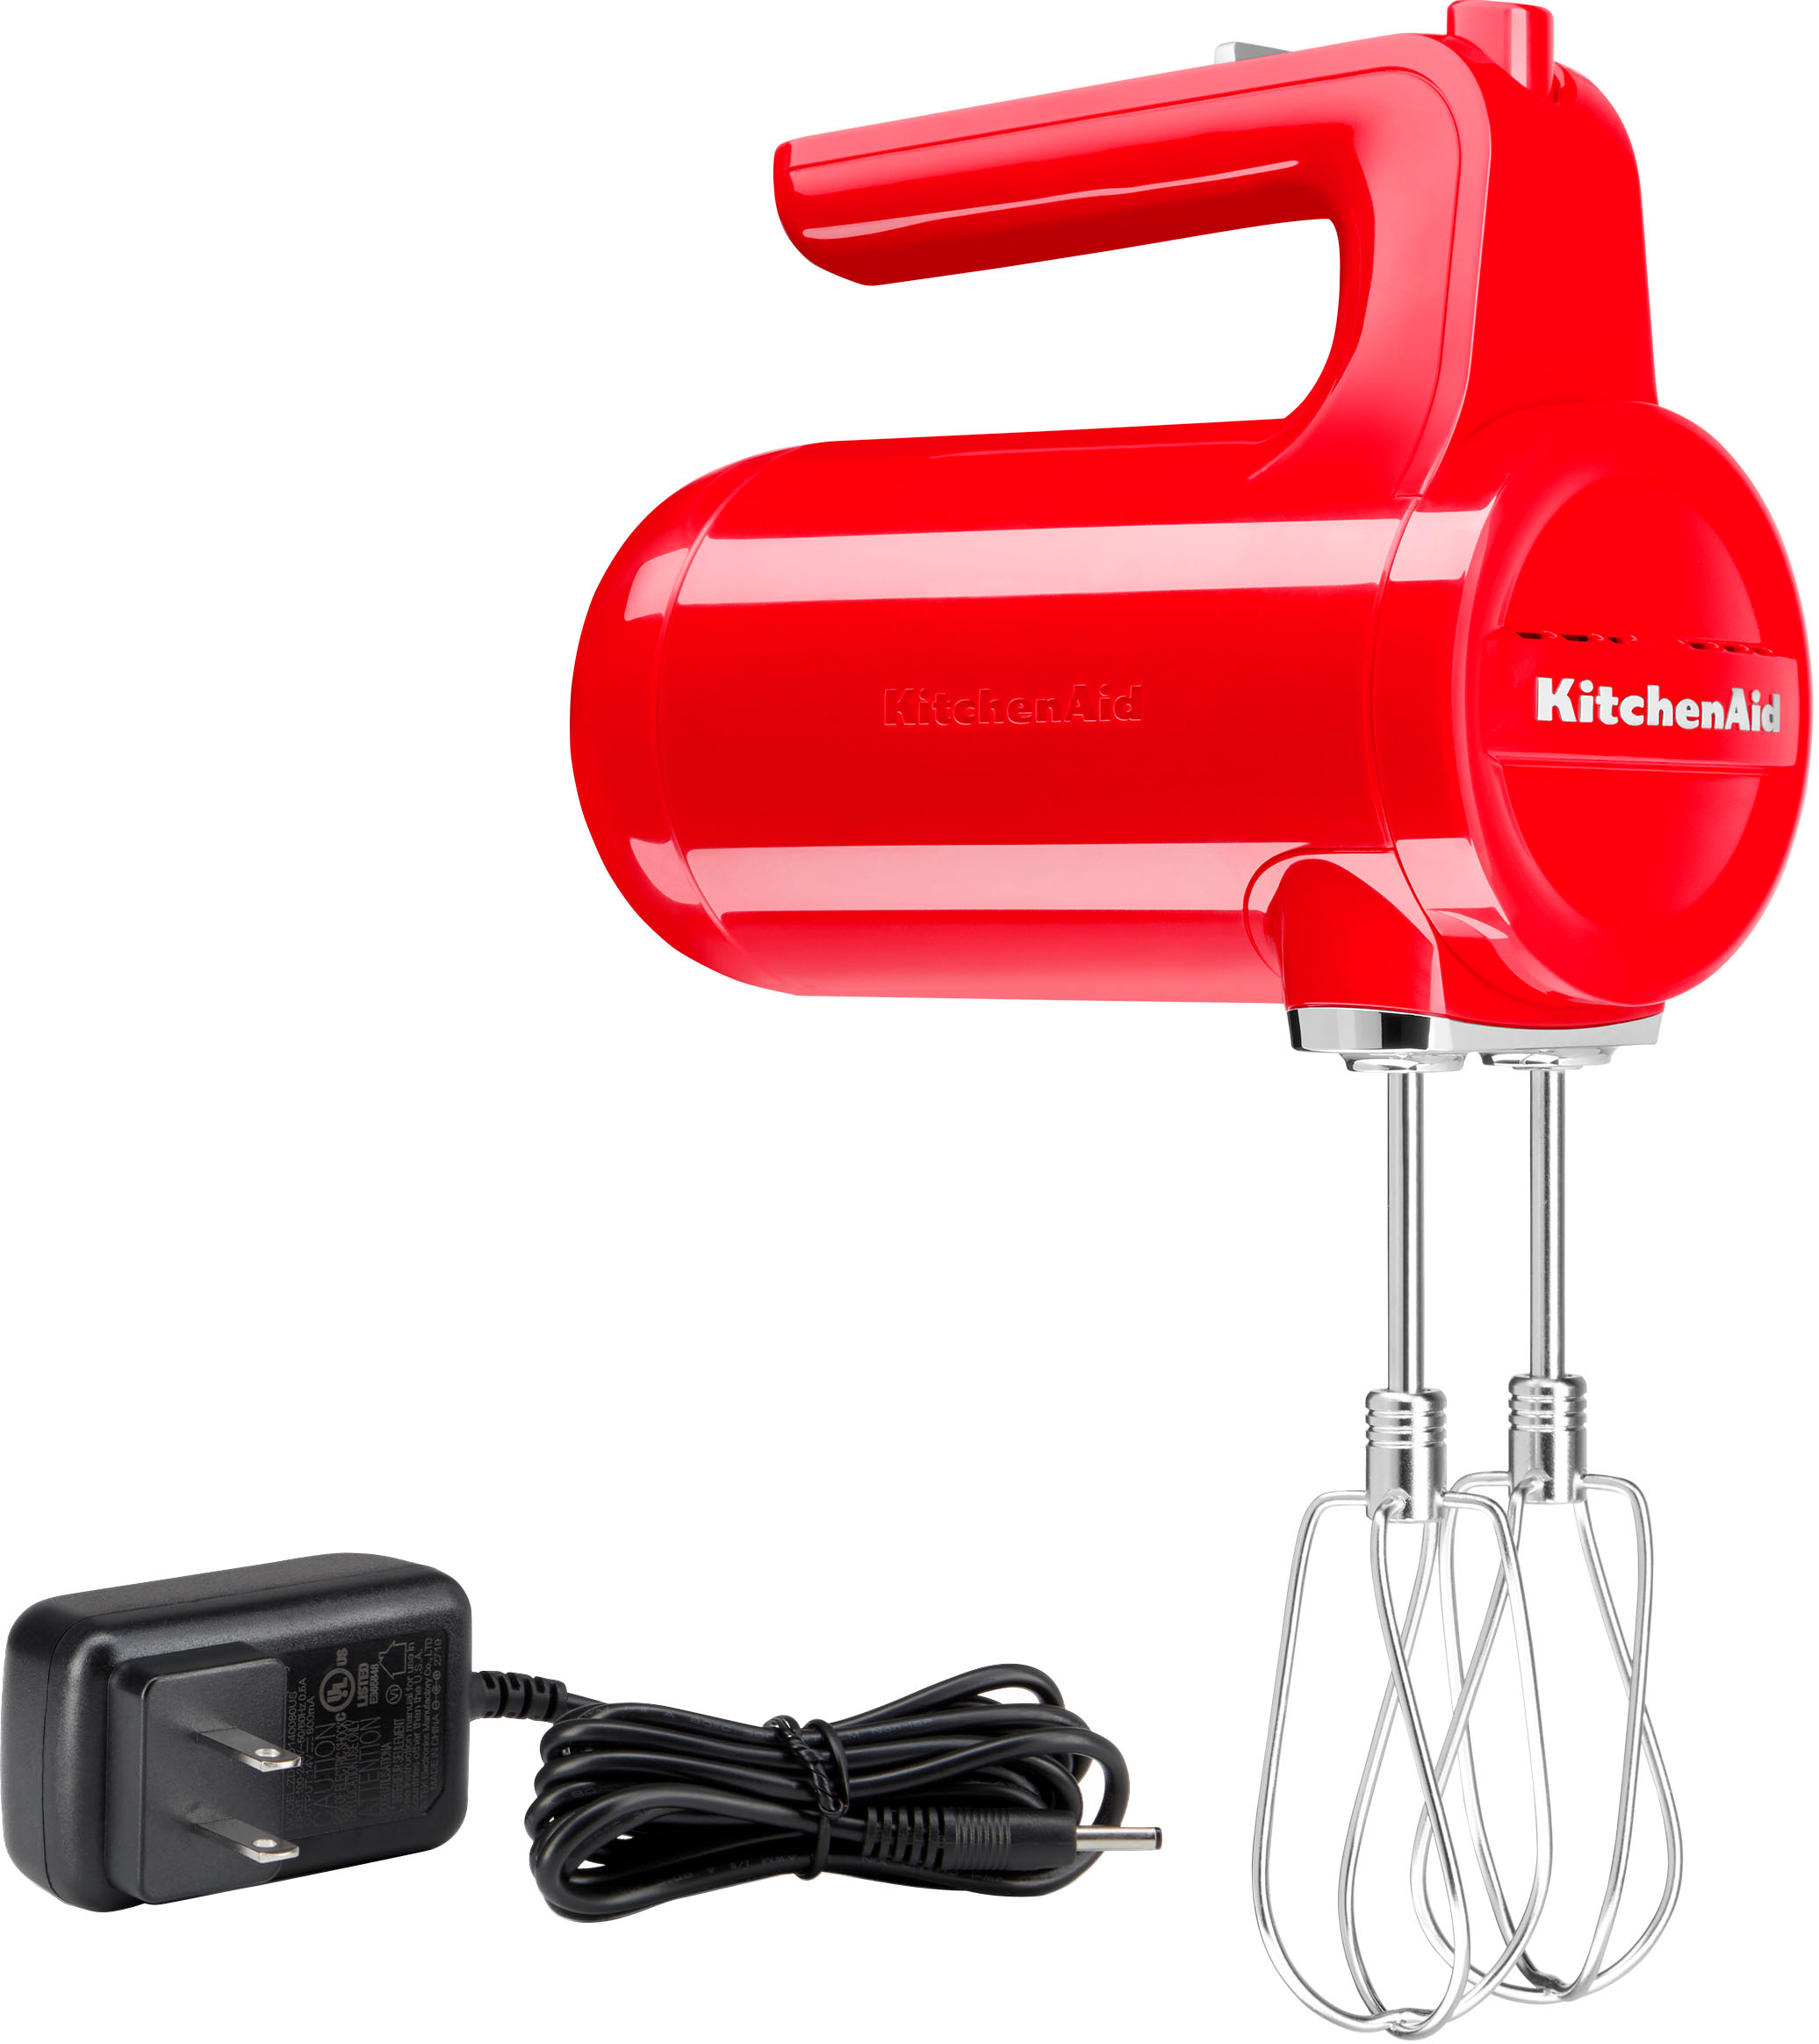 Best Buy: KitchenAid Cordless 7 Speed Hand Mixer Passion Red KHMB732PA